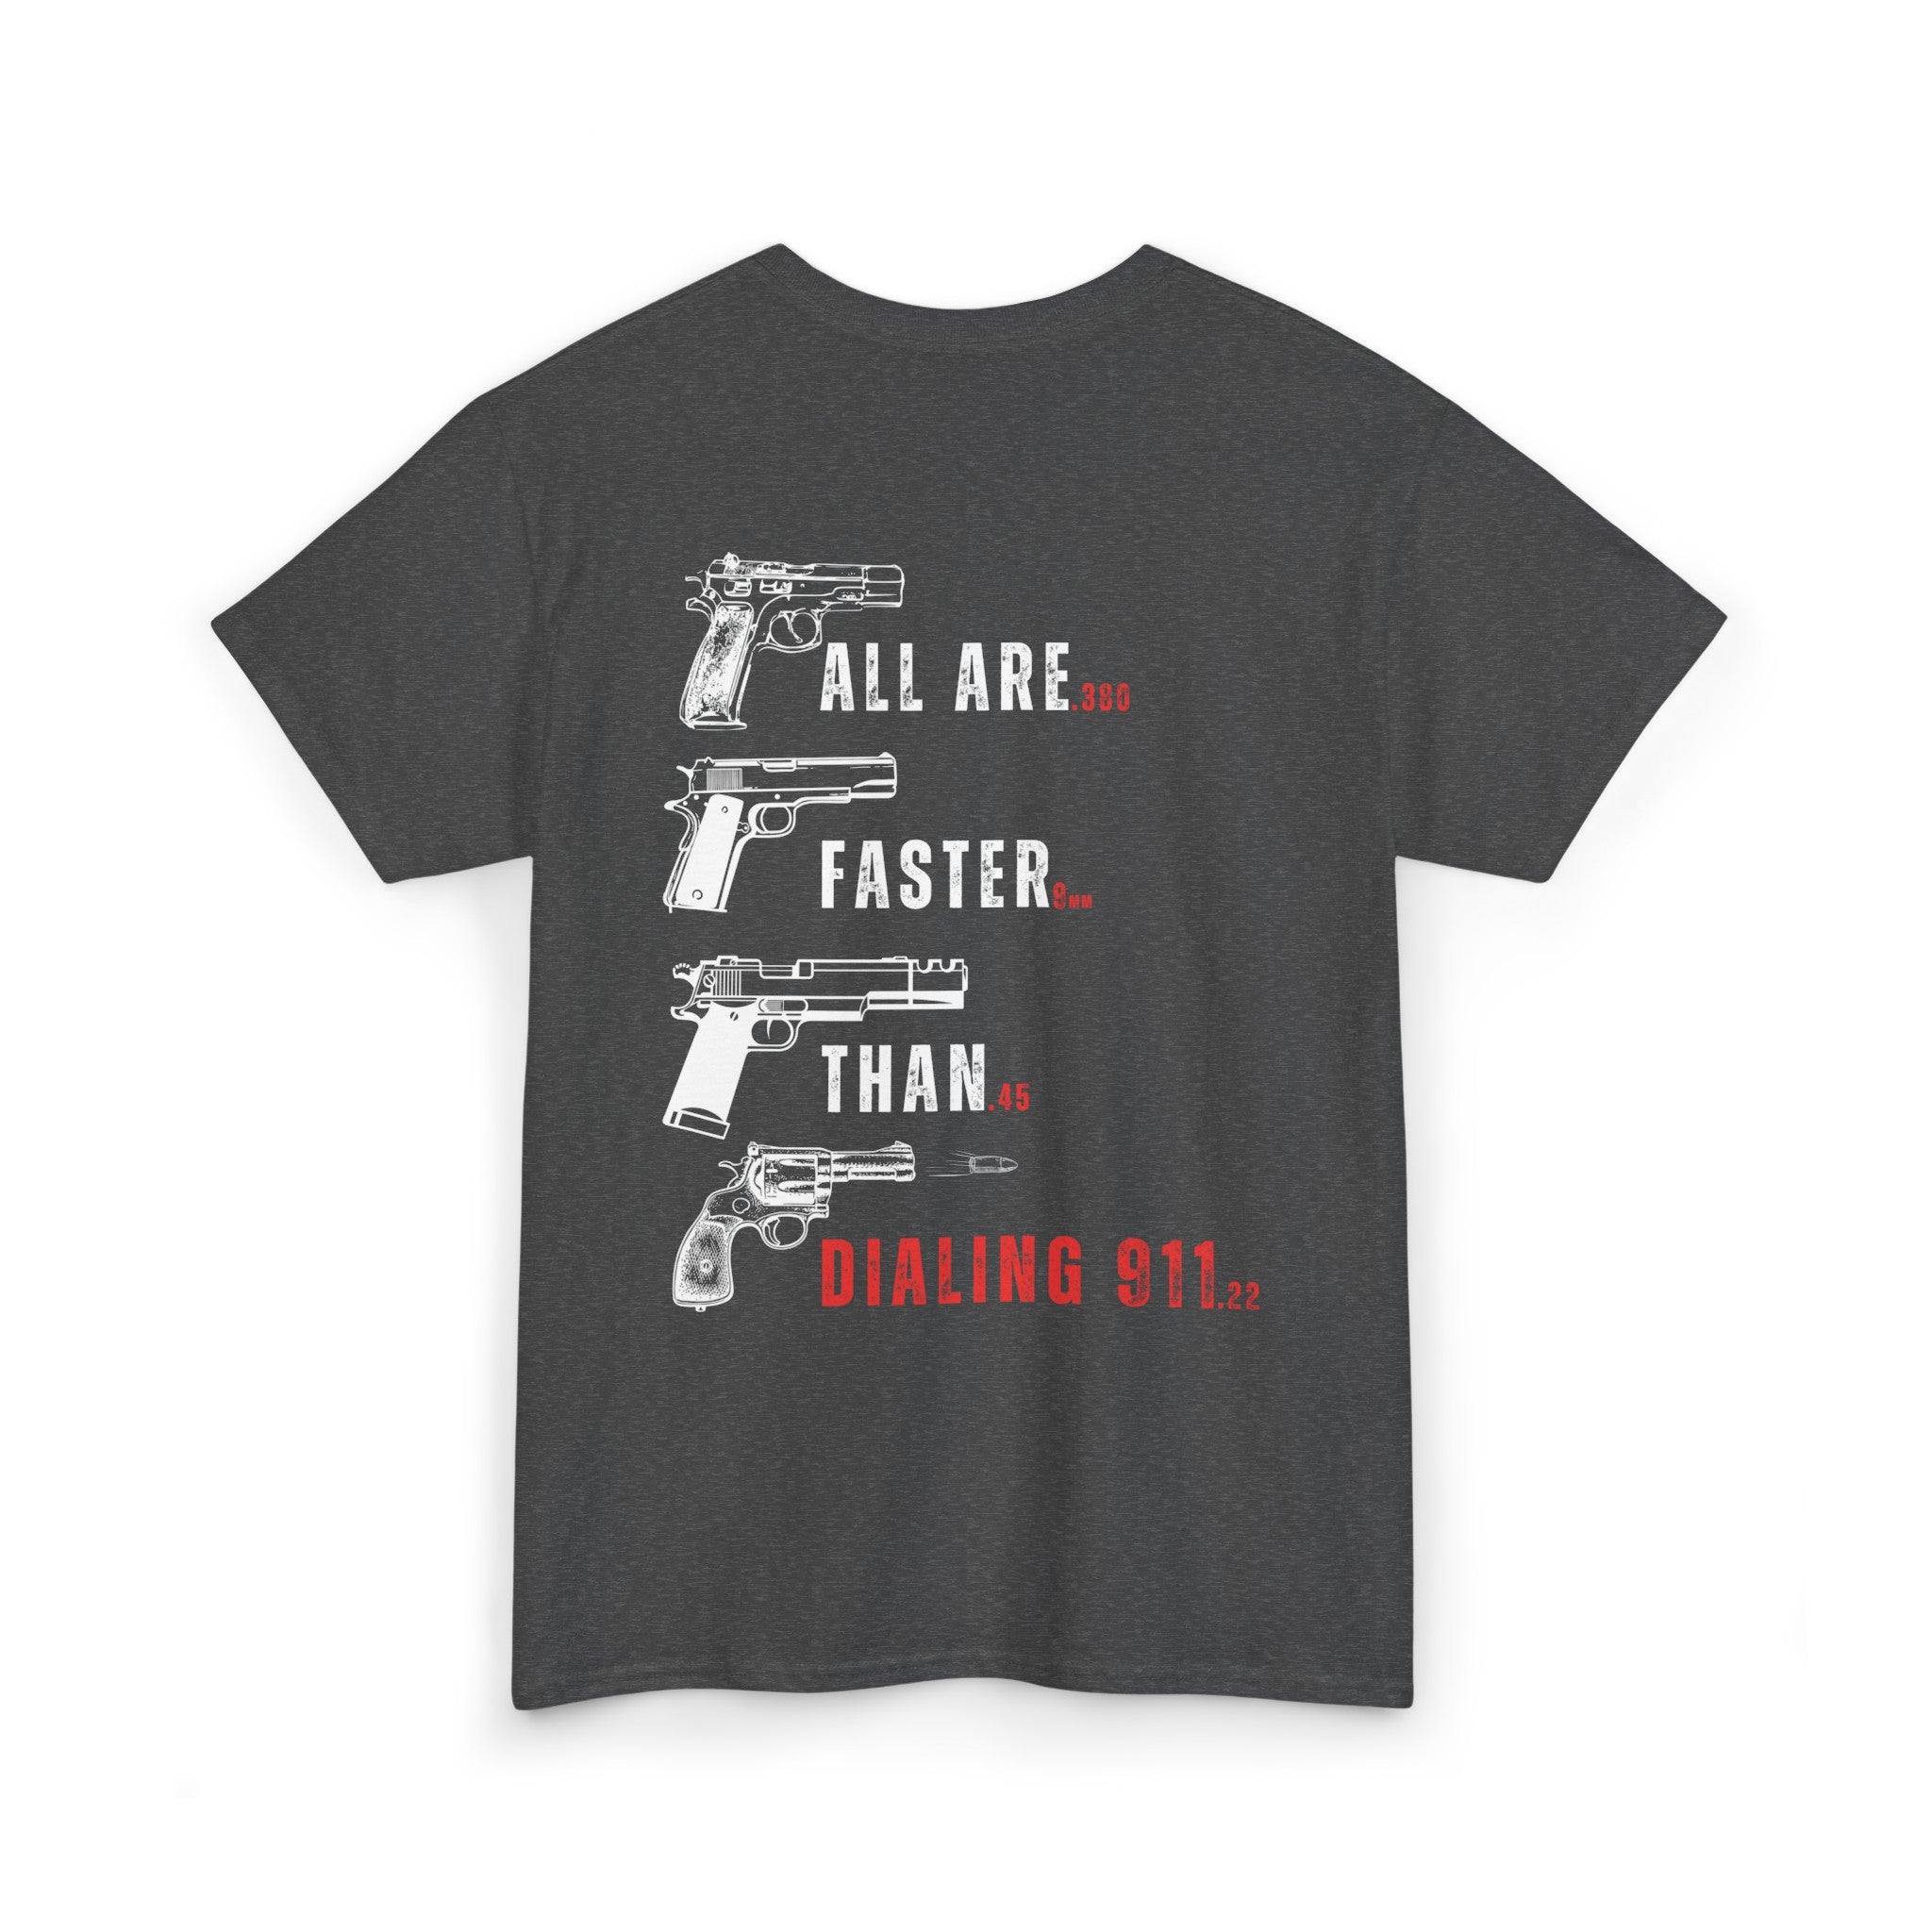 All are Faster than Dialing 911 T-shirt